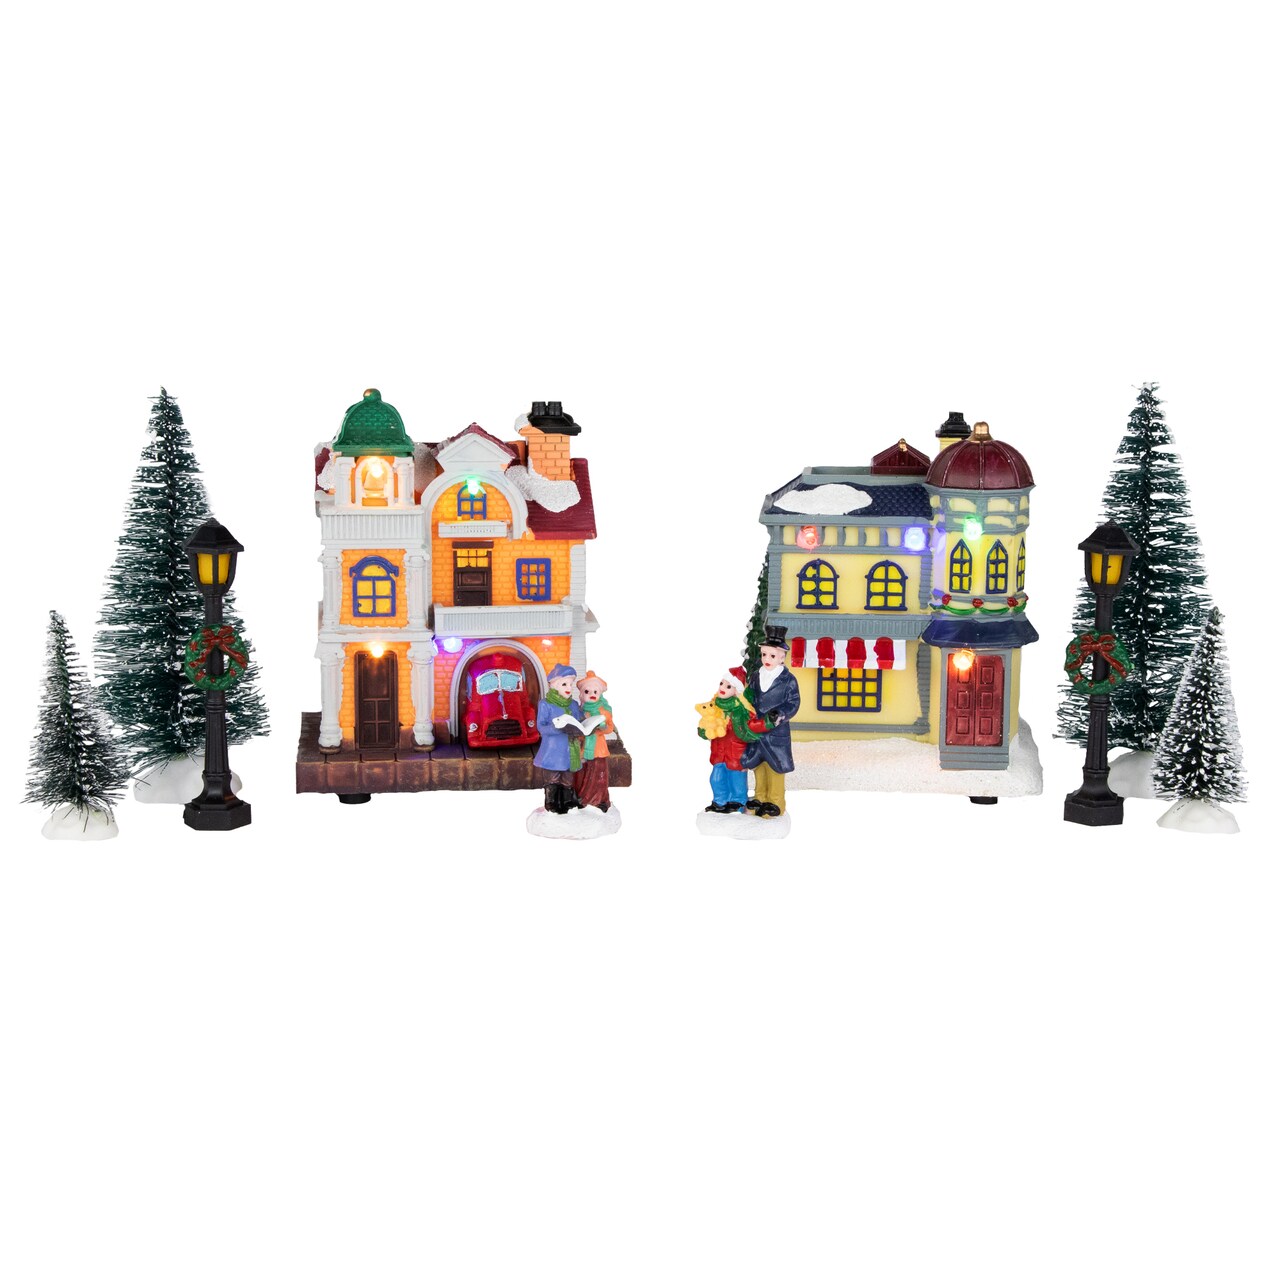 Northlight 10-Piece LED Lighted Buildings and Trees Christmas Village Display Set